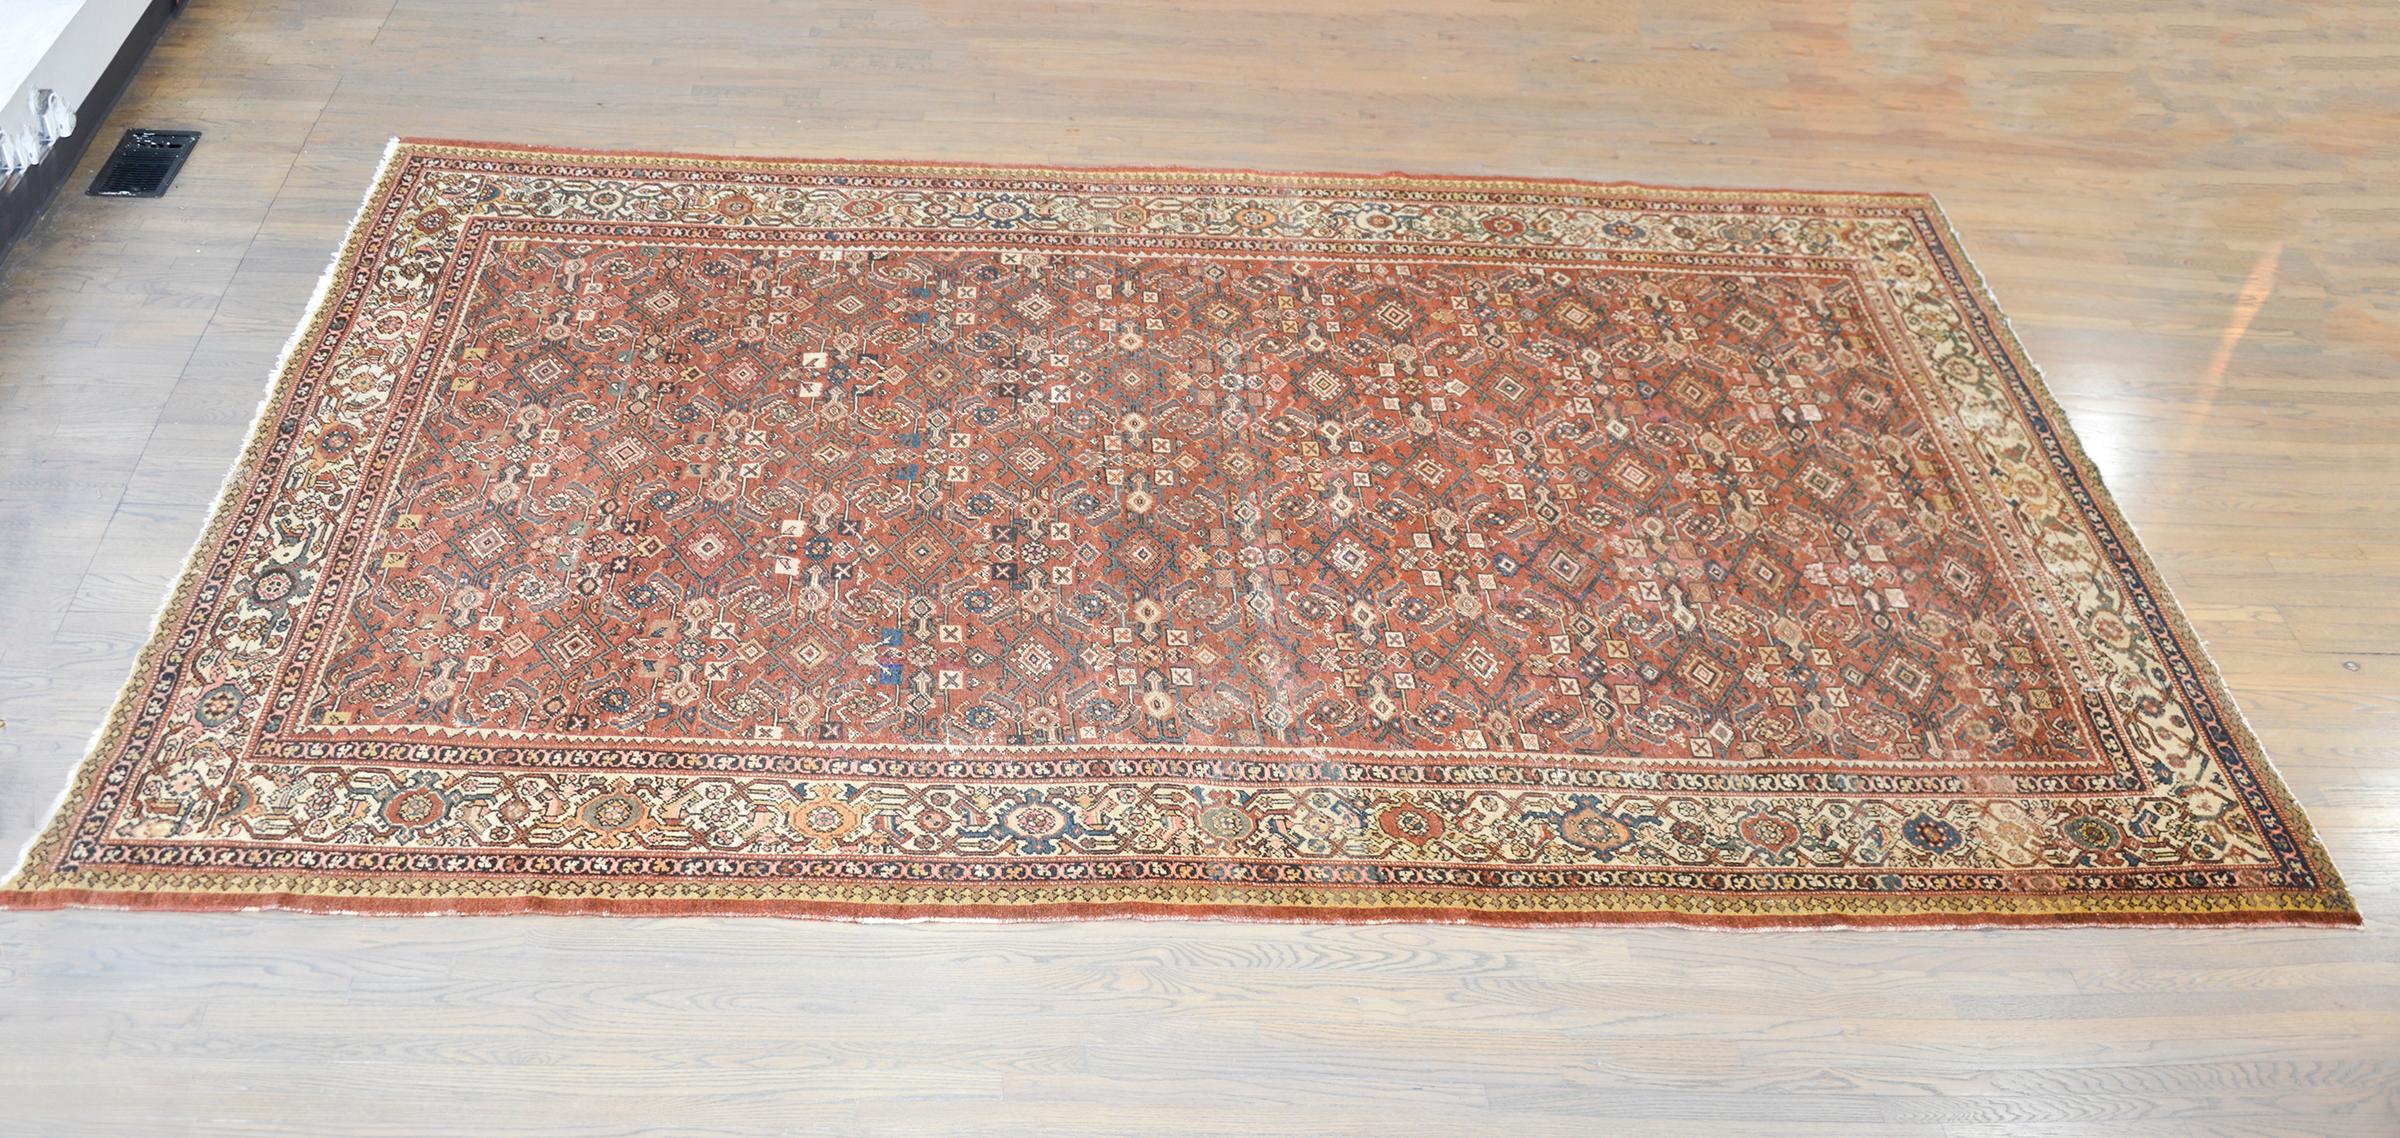 An incredible early 20th century Persian Mahal rug with an all-over floral trellis pattern woven in beautiful muted reds, blues, greens, and golds, set against a burnt orange background, and surrounded by a wide floral and scrolling vine partnered